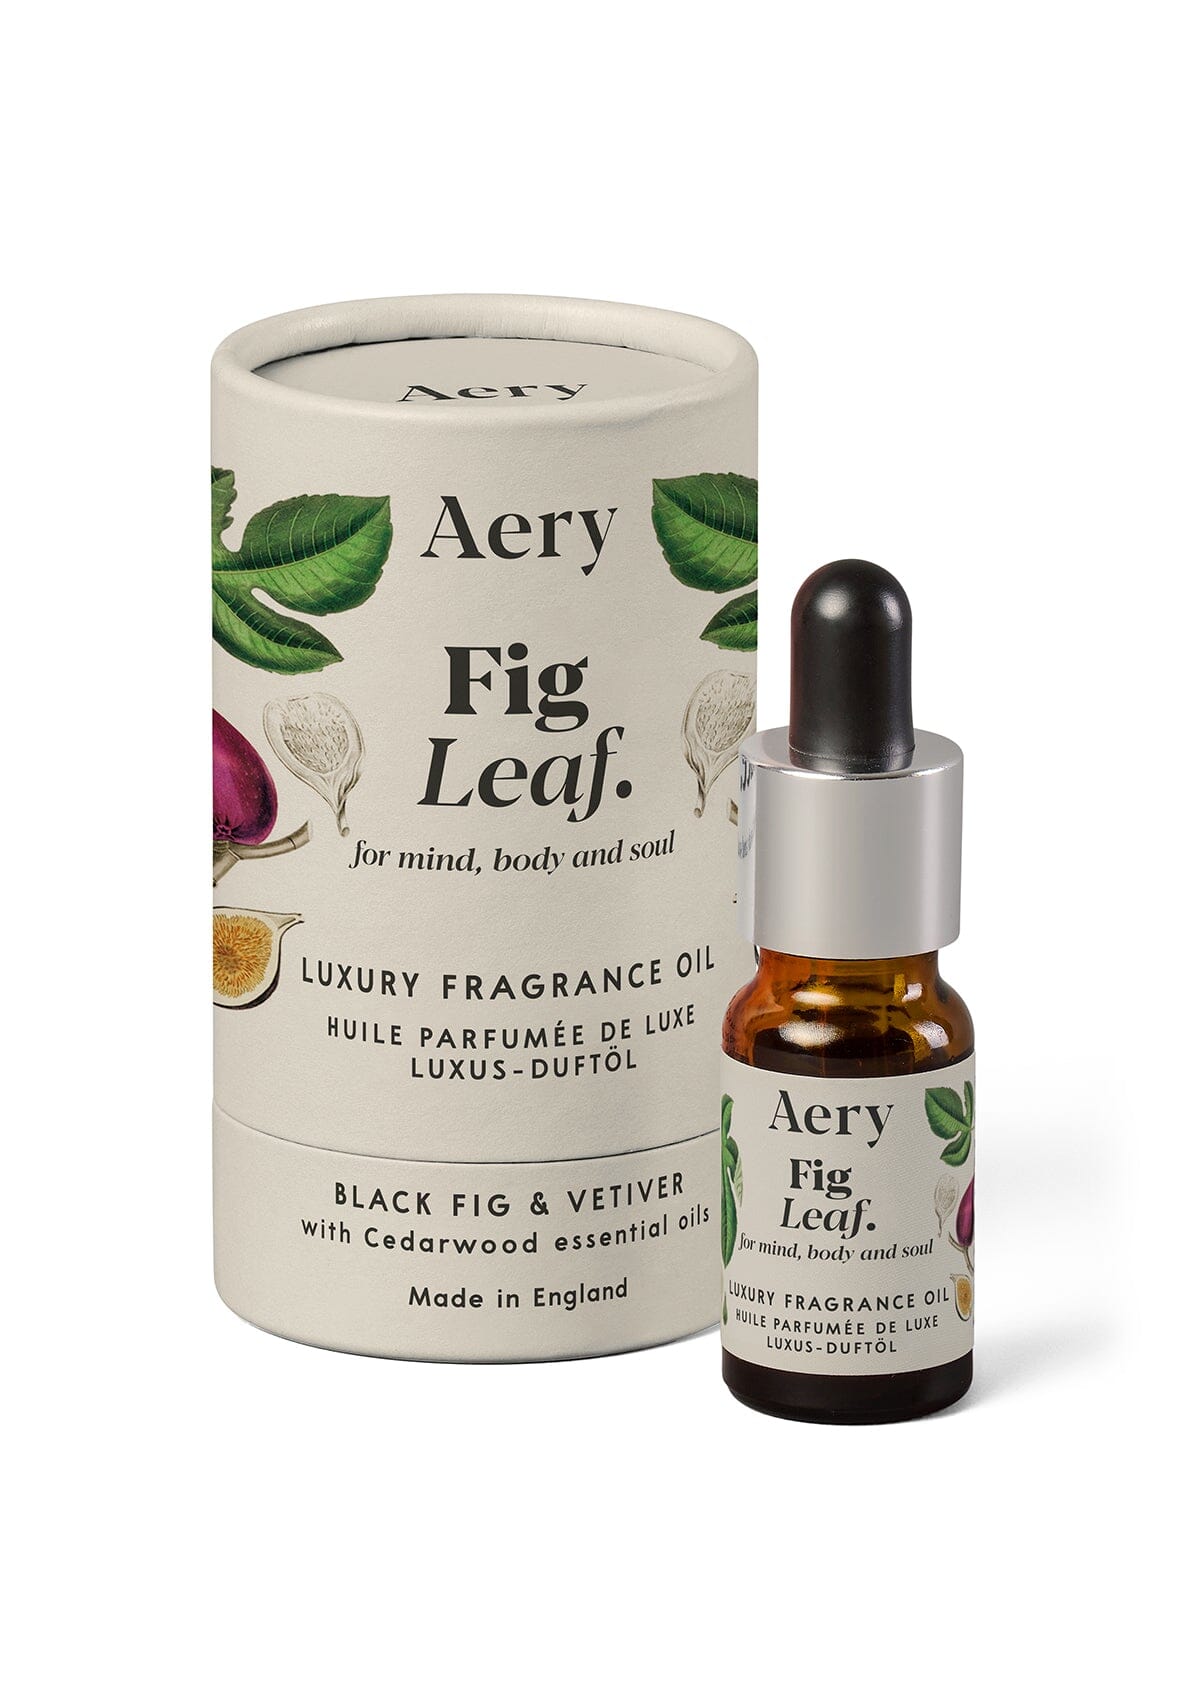 Fig Leaf fragrance oil by Aery displayed next to product packaging on white background 